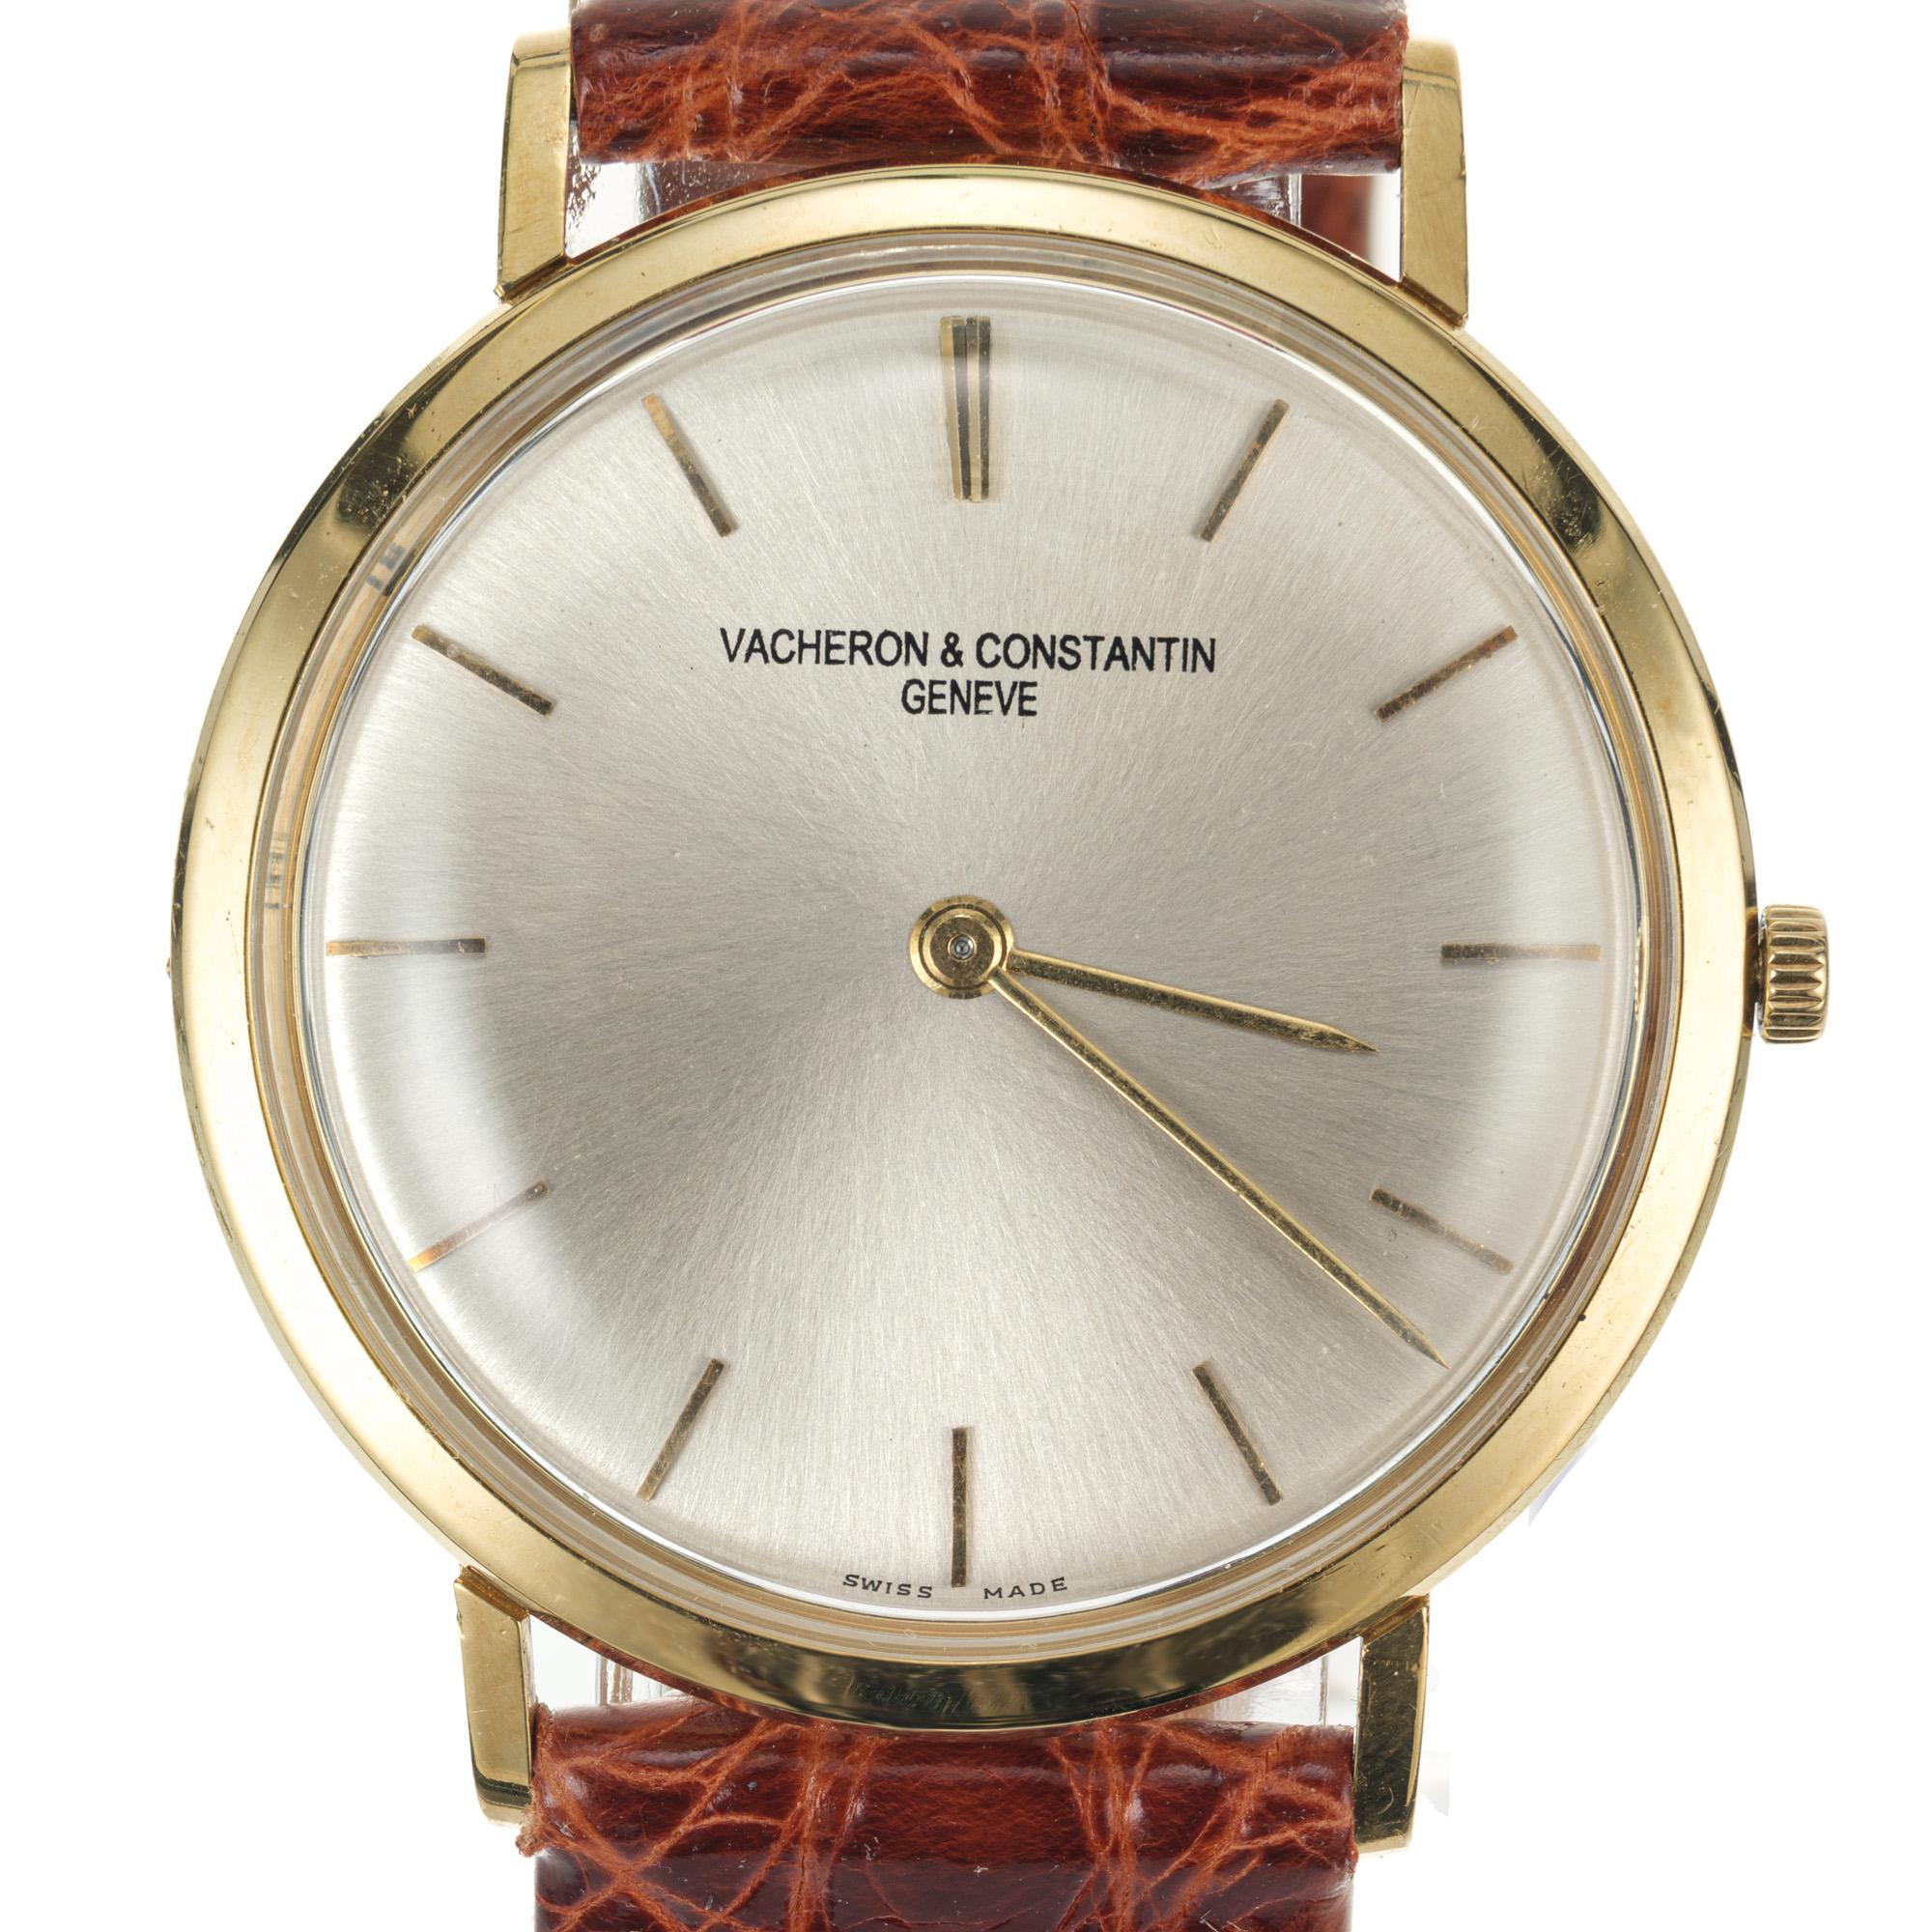 Vacheron & Constantin 18k yellow gold men's wristwatch. Beautiful example of early 1960's watch making when the worlds watch manufacturers were trying to prove who could make the thinnest watch. Vacheron called this model 